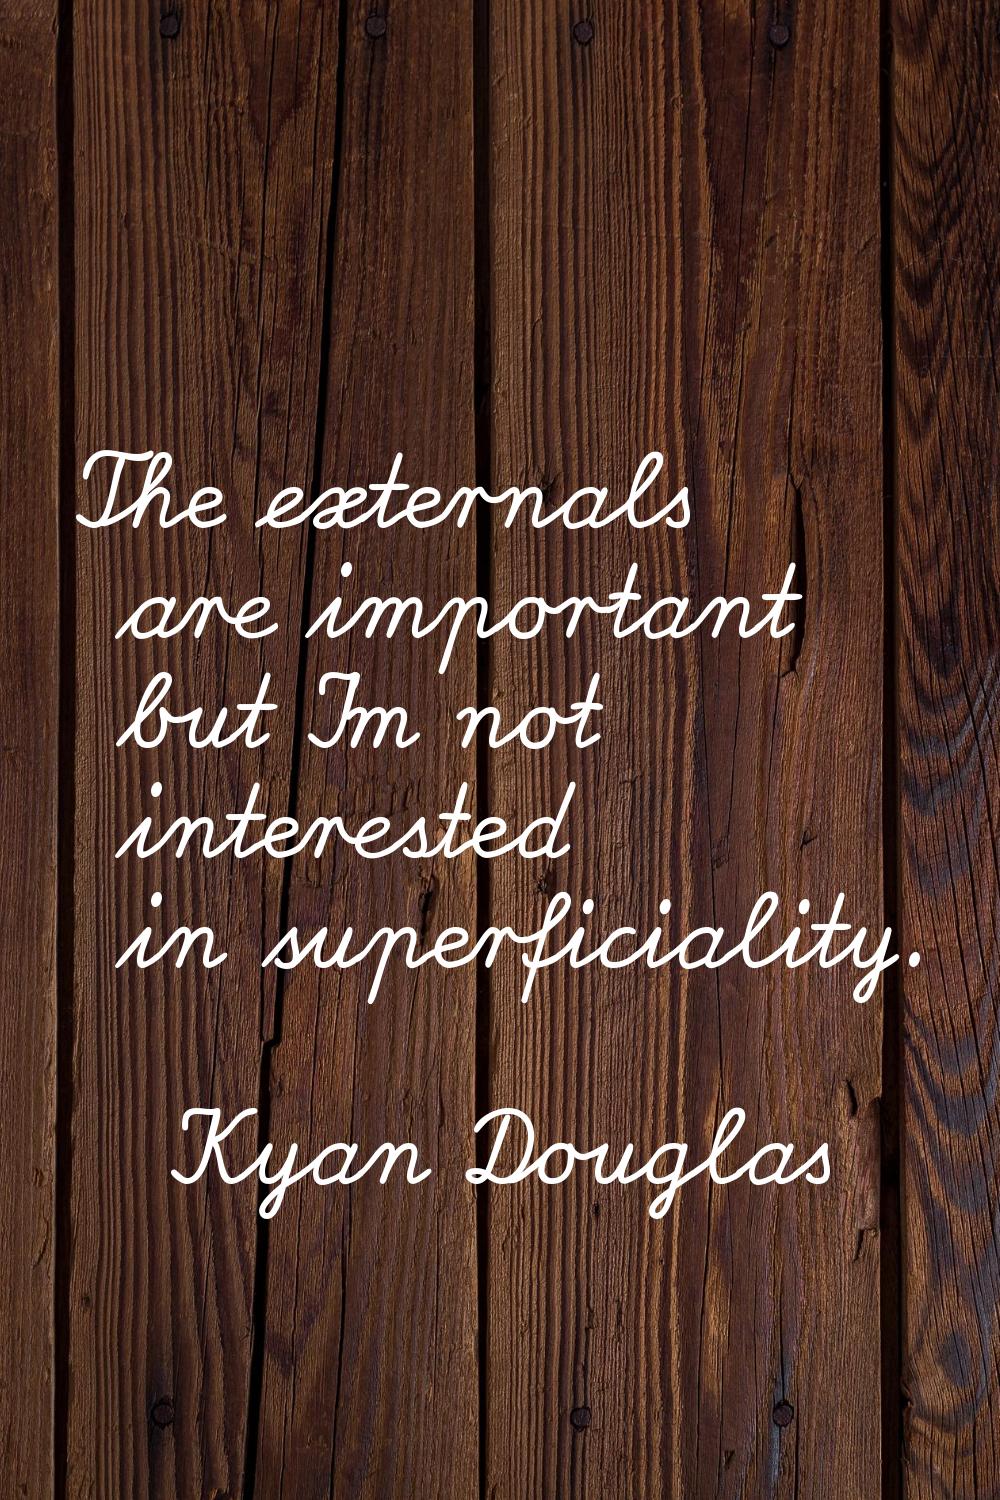 The externals are important but I'm not interested in superficiality.